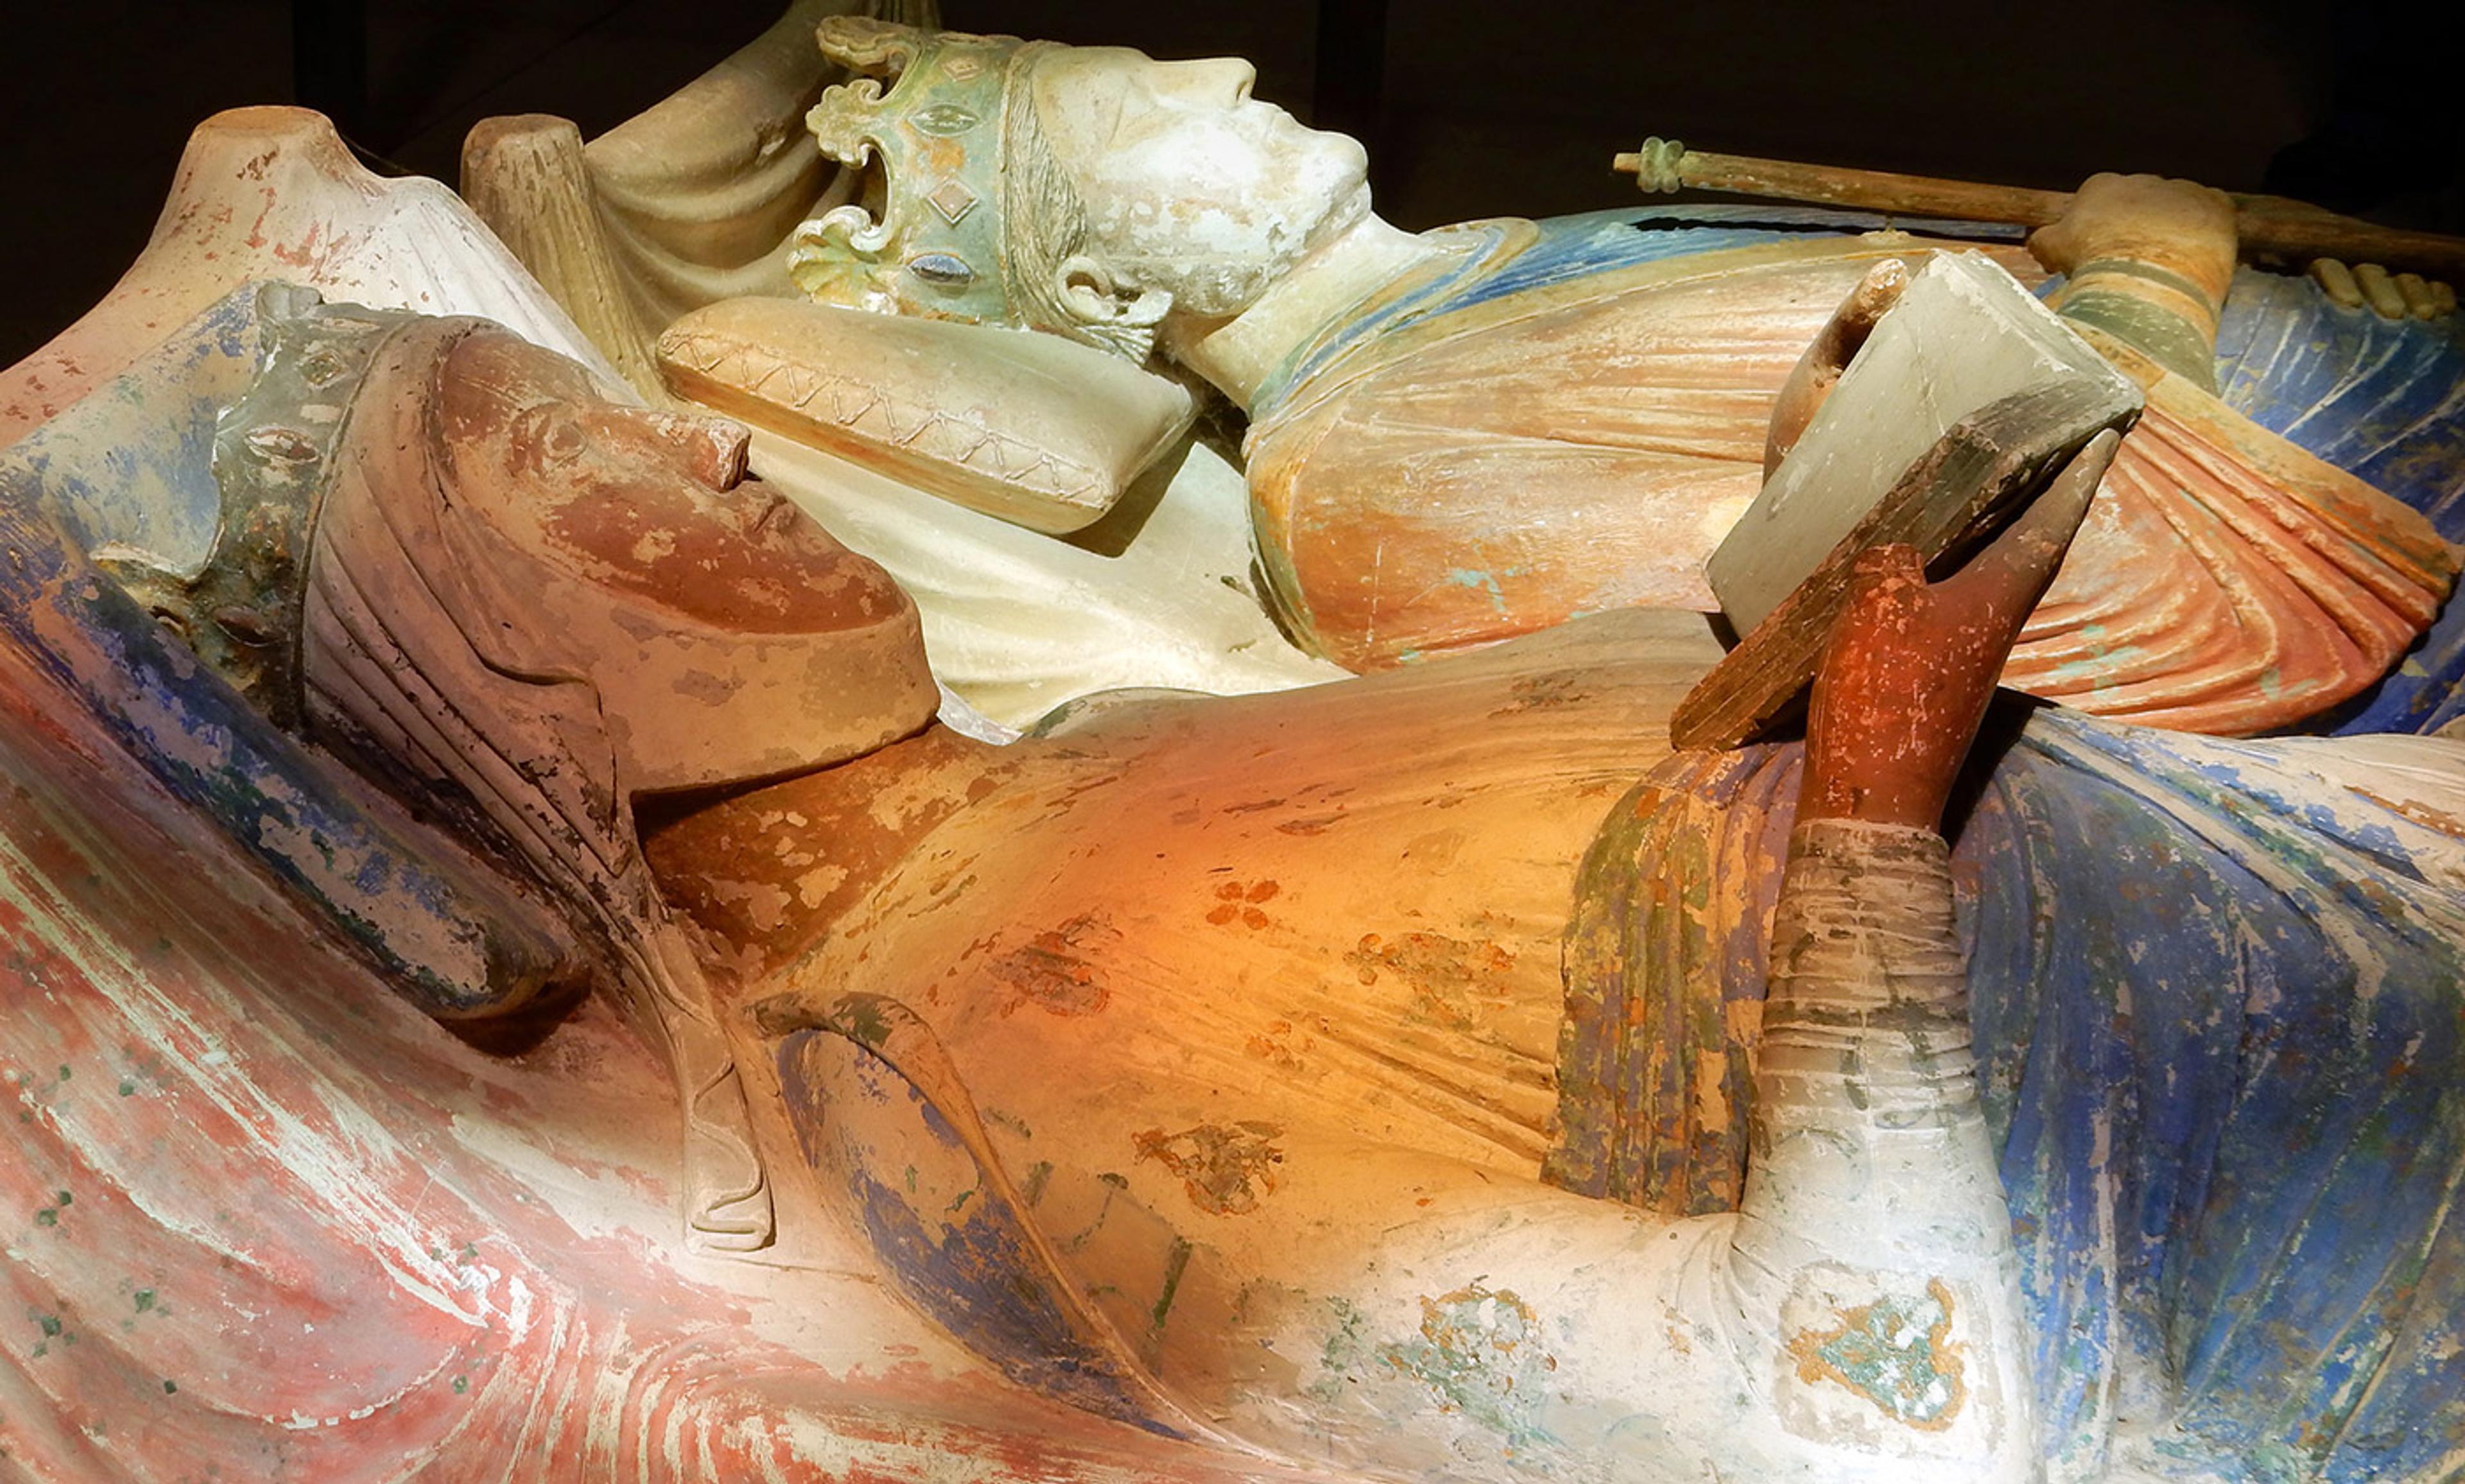 <p>Power behind the throne. The tomb of Eleanor of Aquitaine alongside Henry II of England in the church at Fontevraud Abbey in Anjou, France. <em>Photo courtesy Martin Cooper/Flickr</em></p>